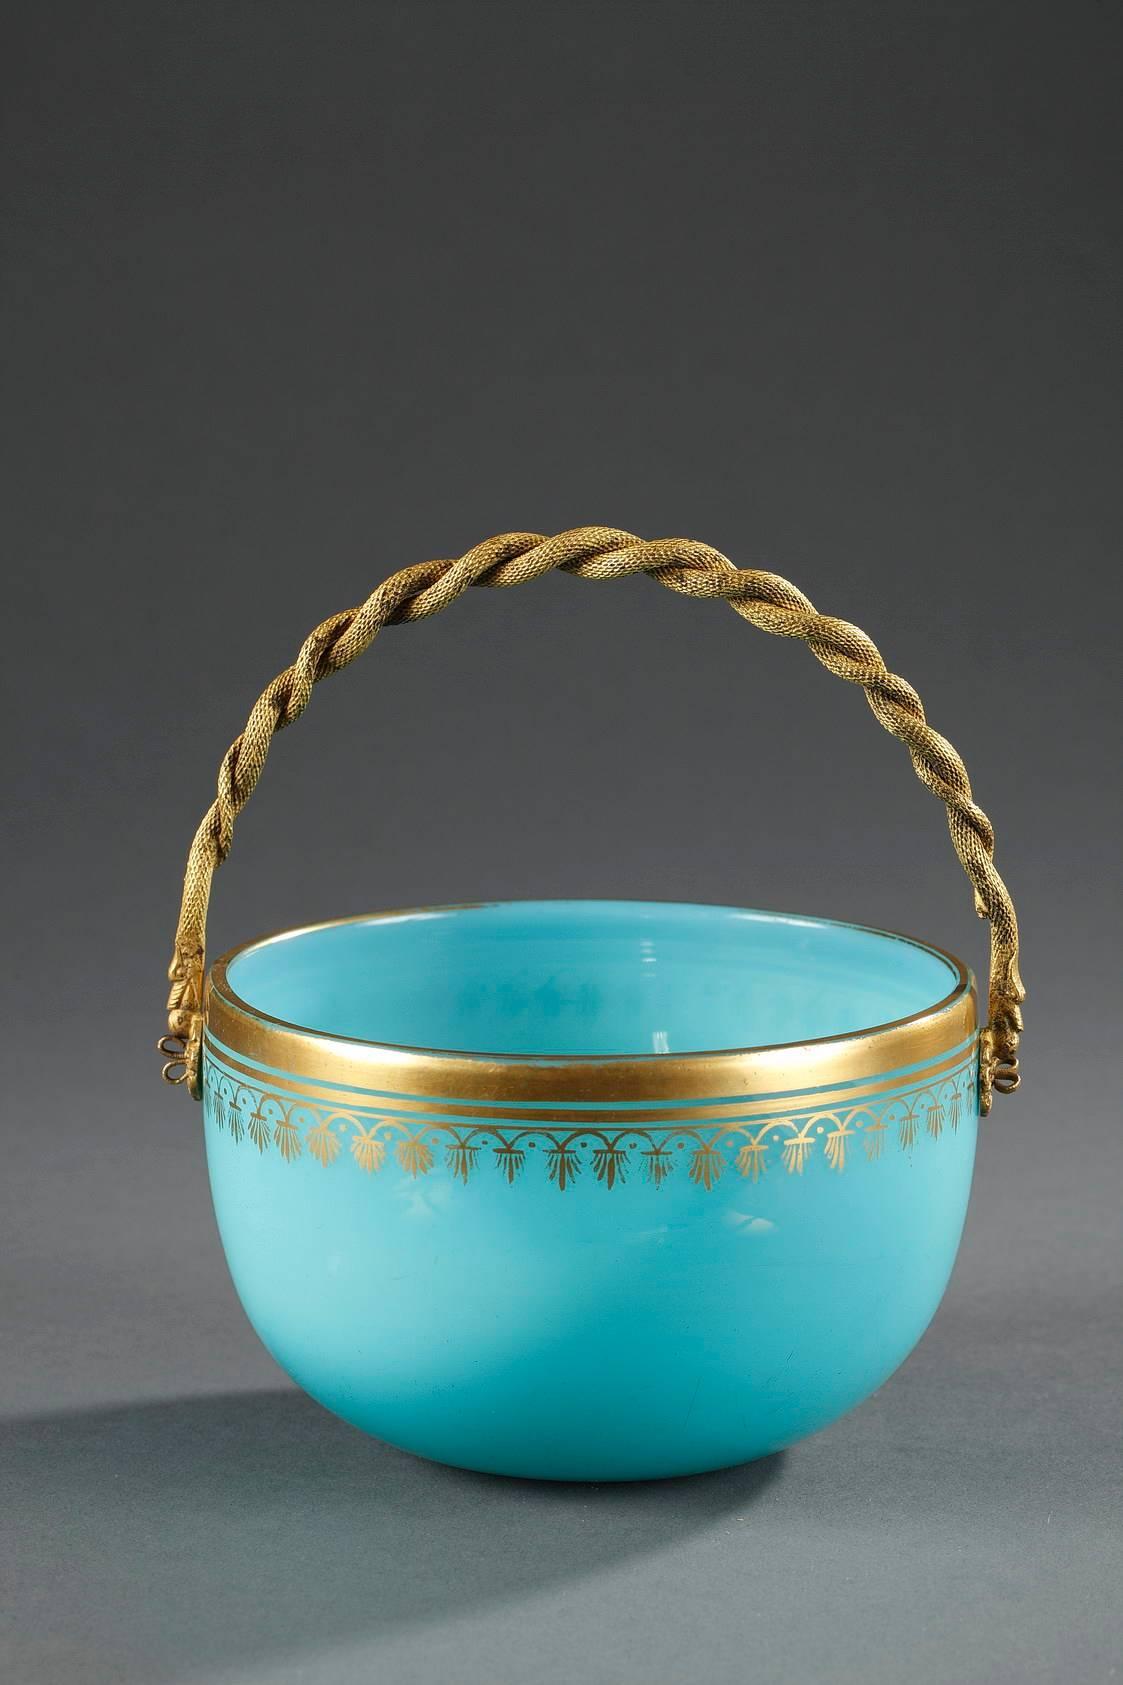 Basket-shaped cup in blue opaline decorated with gilded festoons and stripes. The gilded and sculpted bronze handle is in the shape of two intertwined snakes. Intricate chasing work.
 

circa 1820
Dimension W 5.1 in, D 4.7in, H 3 in.
Dimension